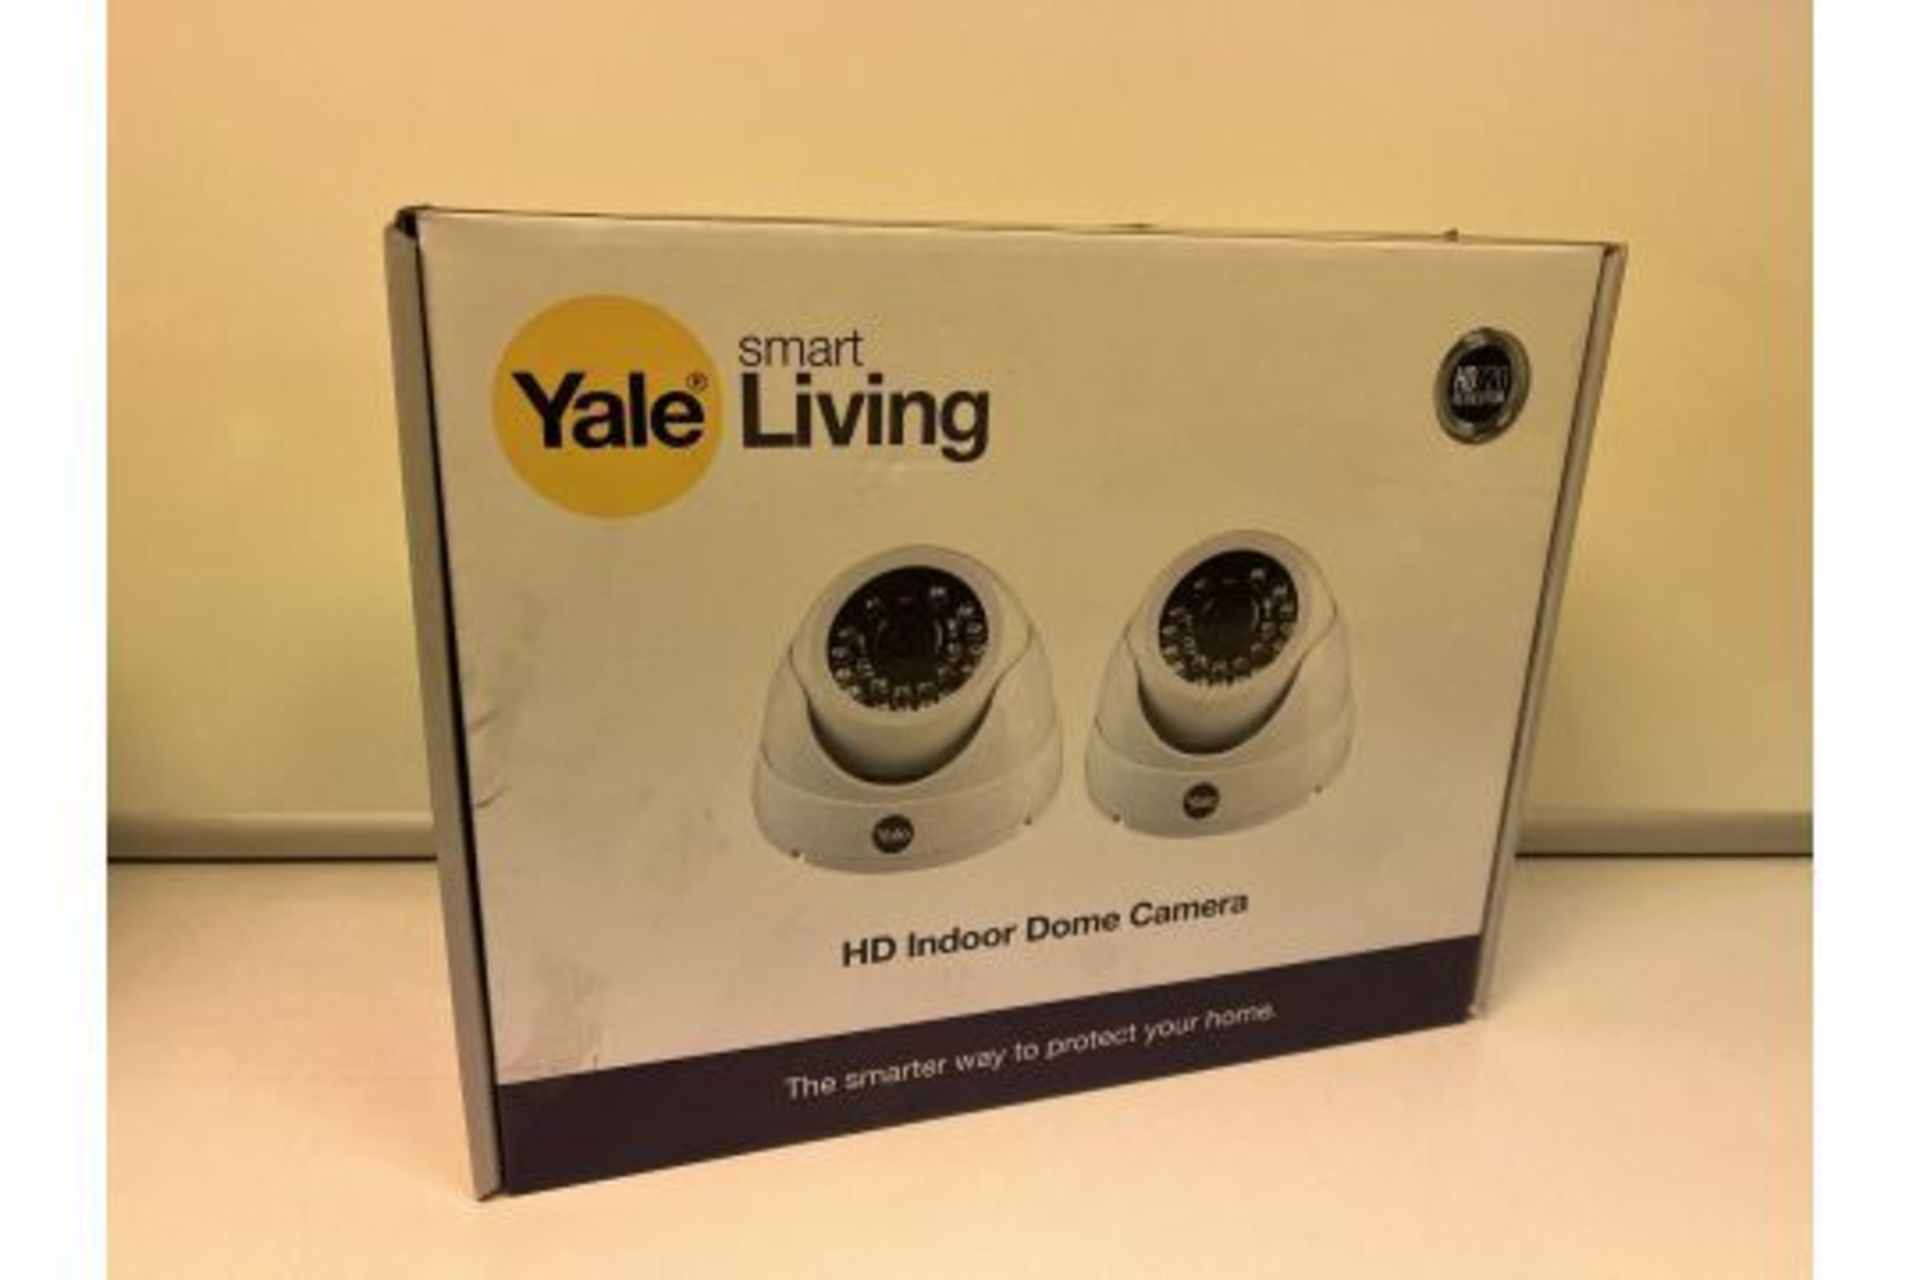 2 X NEW BOXED SETS OF 2 YALE SMART LIVING HD DOME CAMERAS. HD720 RESOLUTION WITH IR NIGHT VISION (